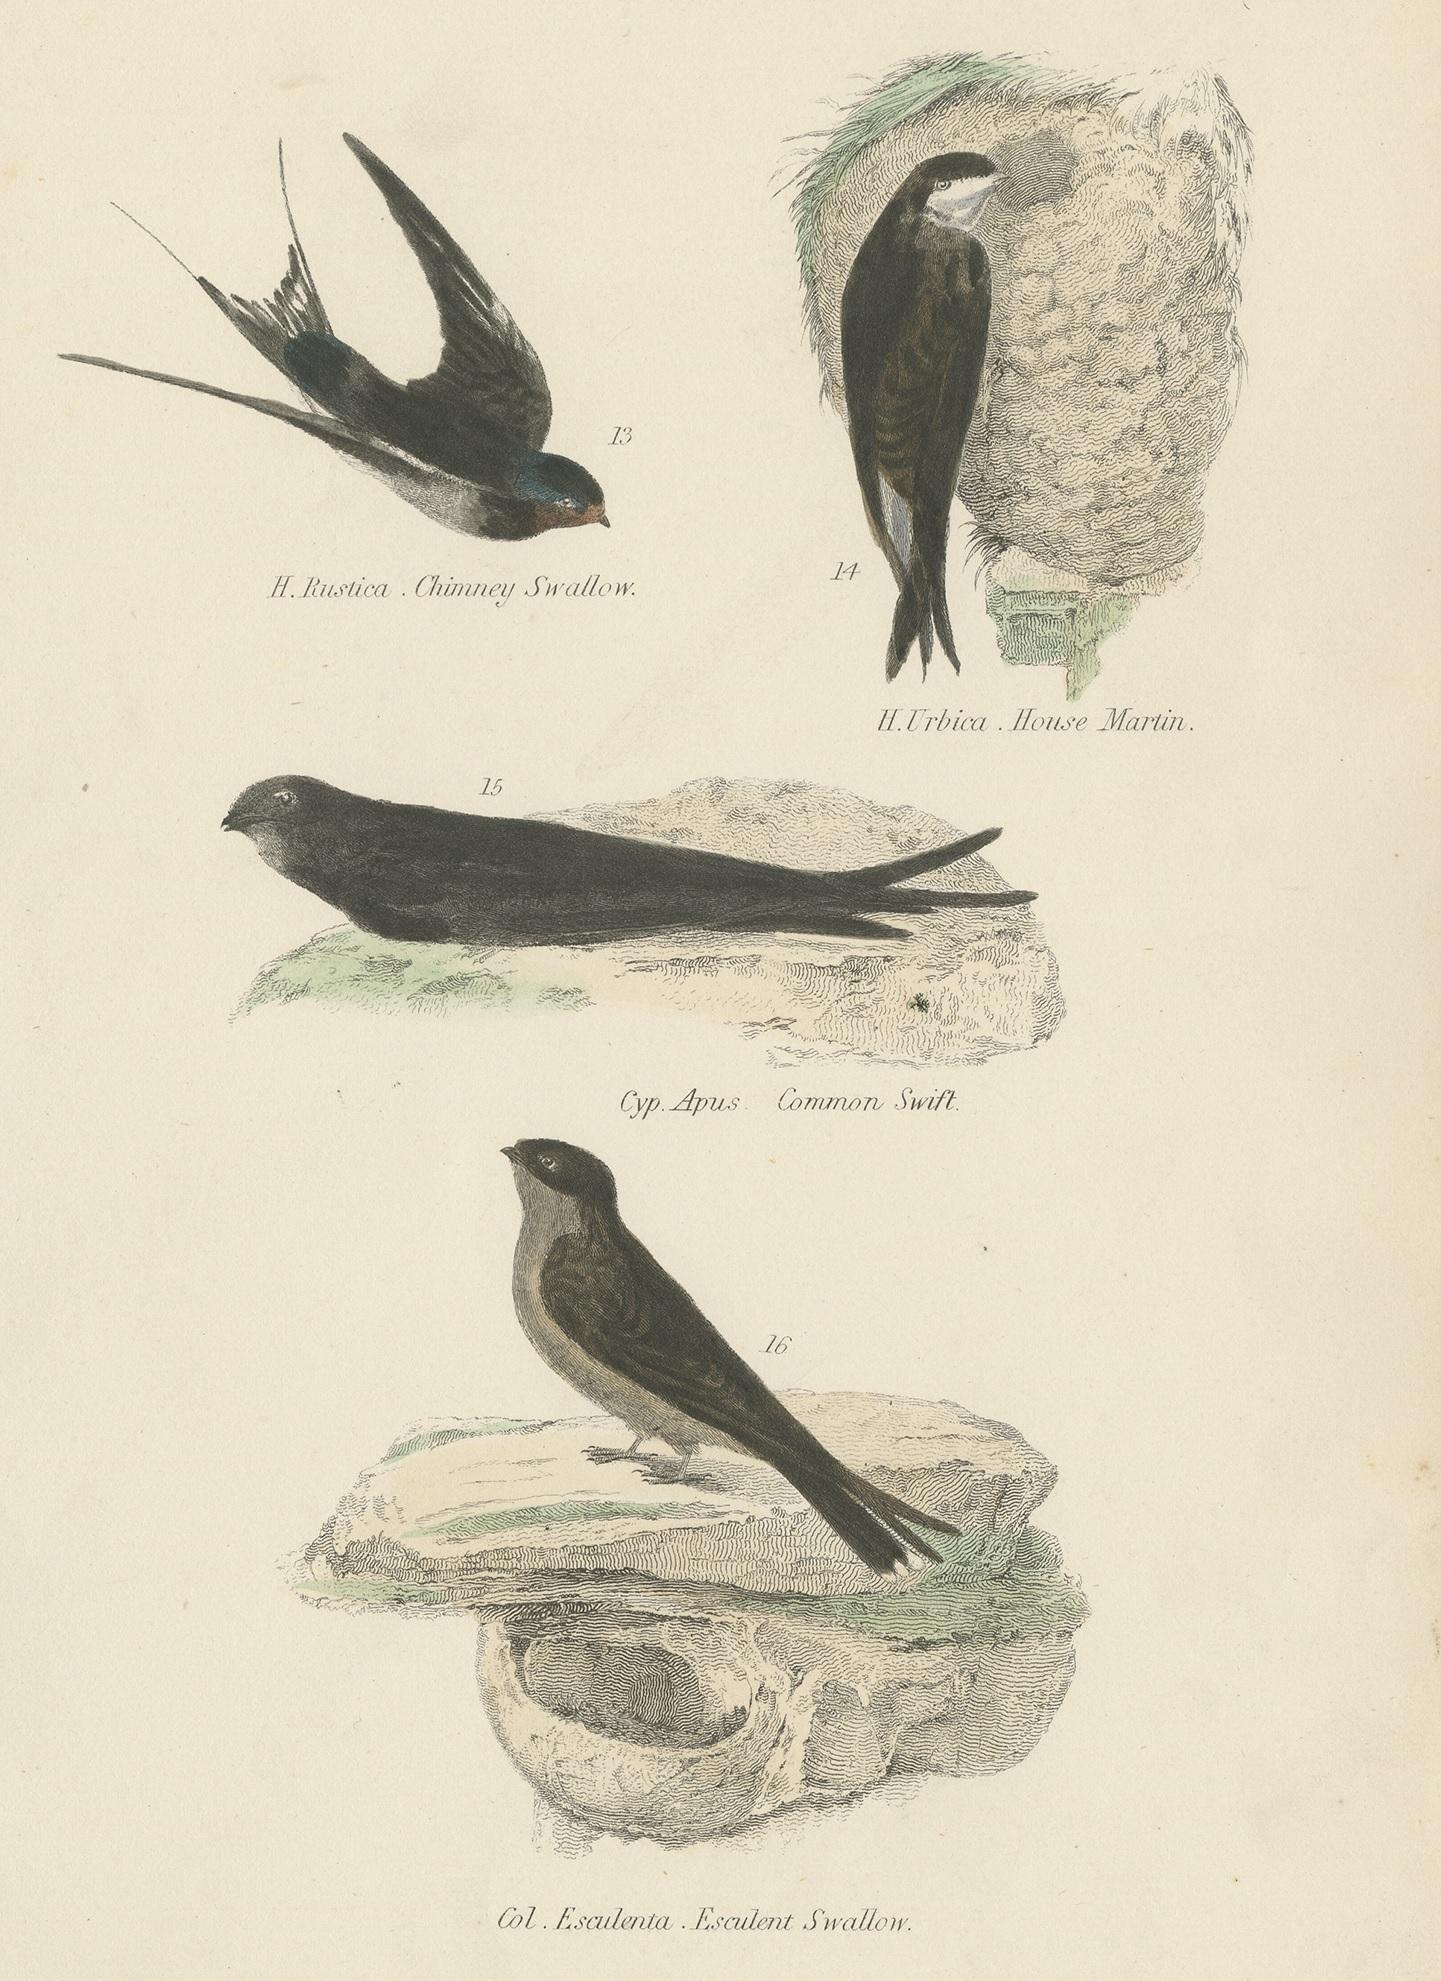 Antique bird print depicting the chimney swallow, house martin, common swift and esculent swallow. This print originates from 'Museum of Natural History' by Sir John Richardson. Published by William Mackenzie.